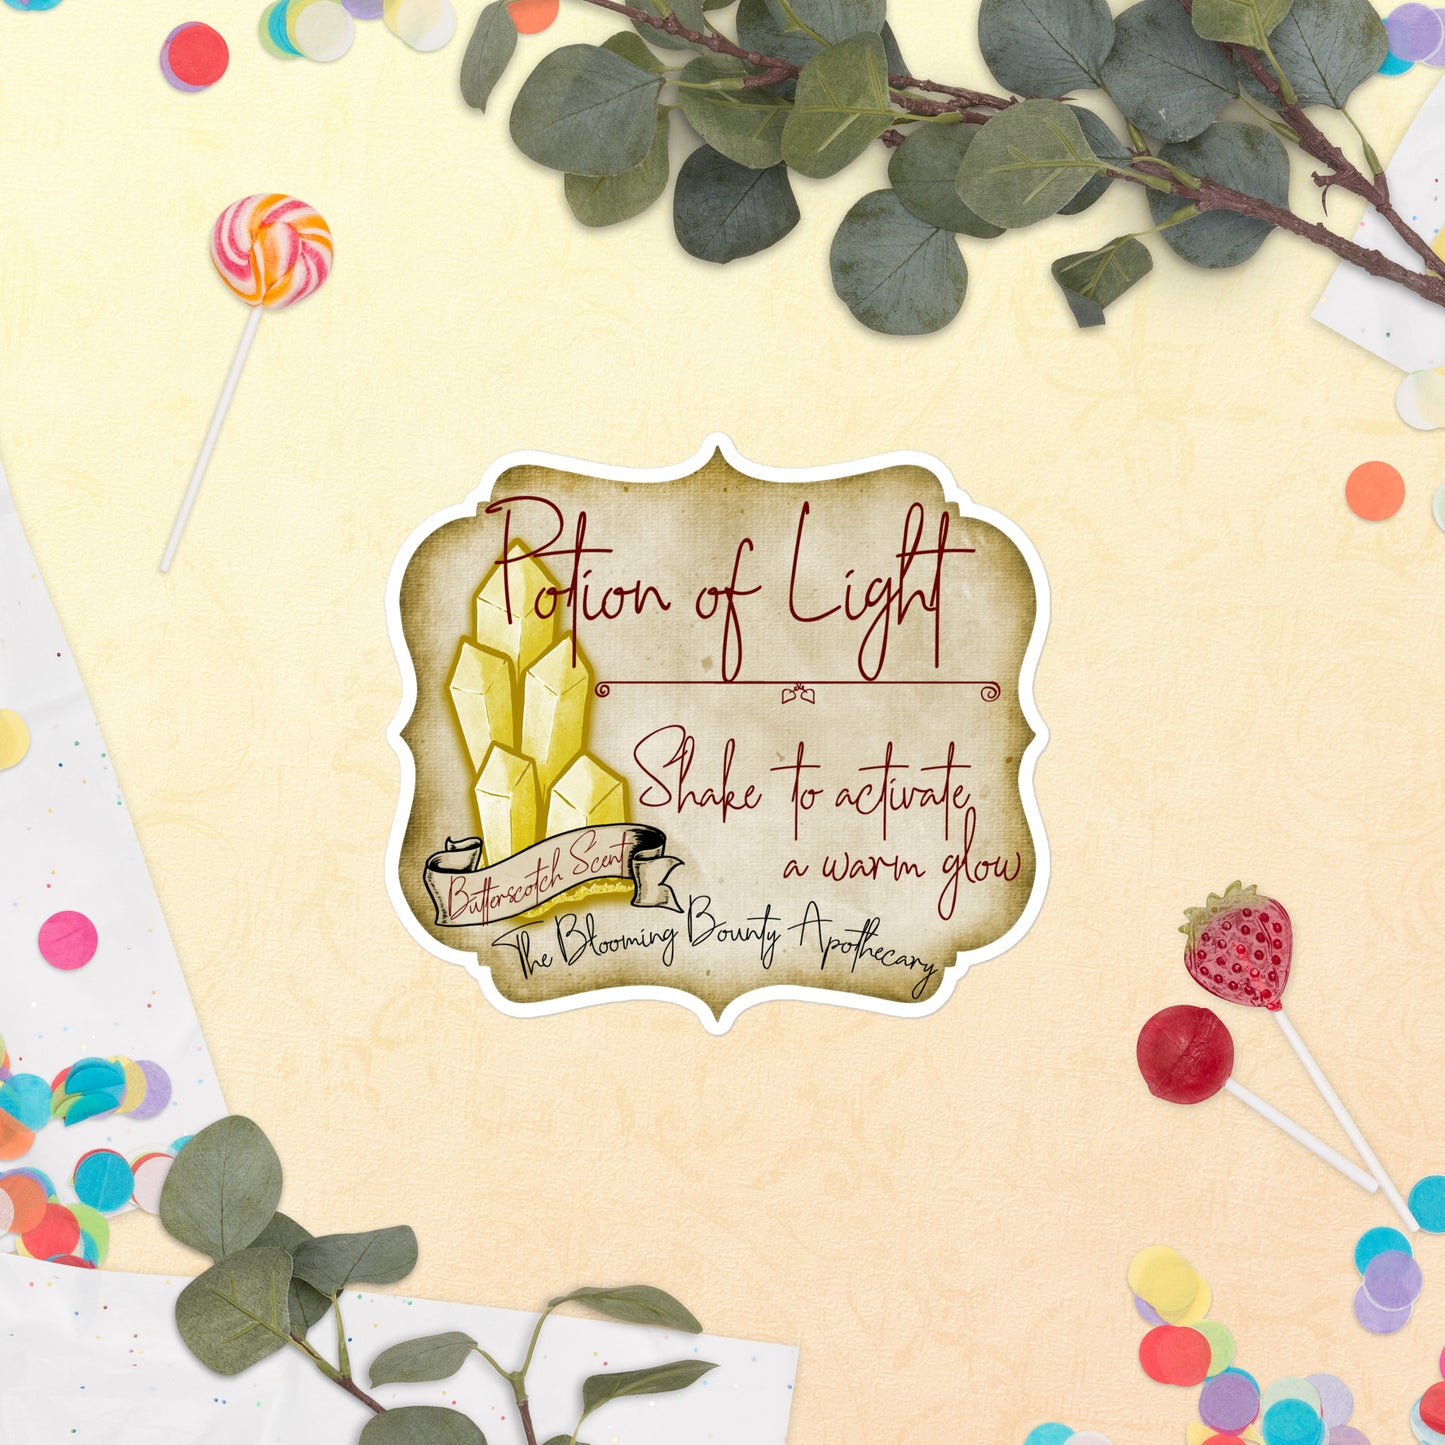 The Potion of Light label: Shake to activate a warm glow. Butterscotch Scent. The Blooming Bounty Apothecary.